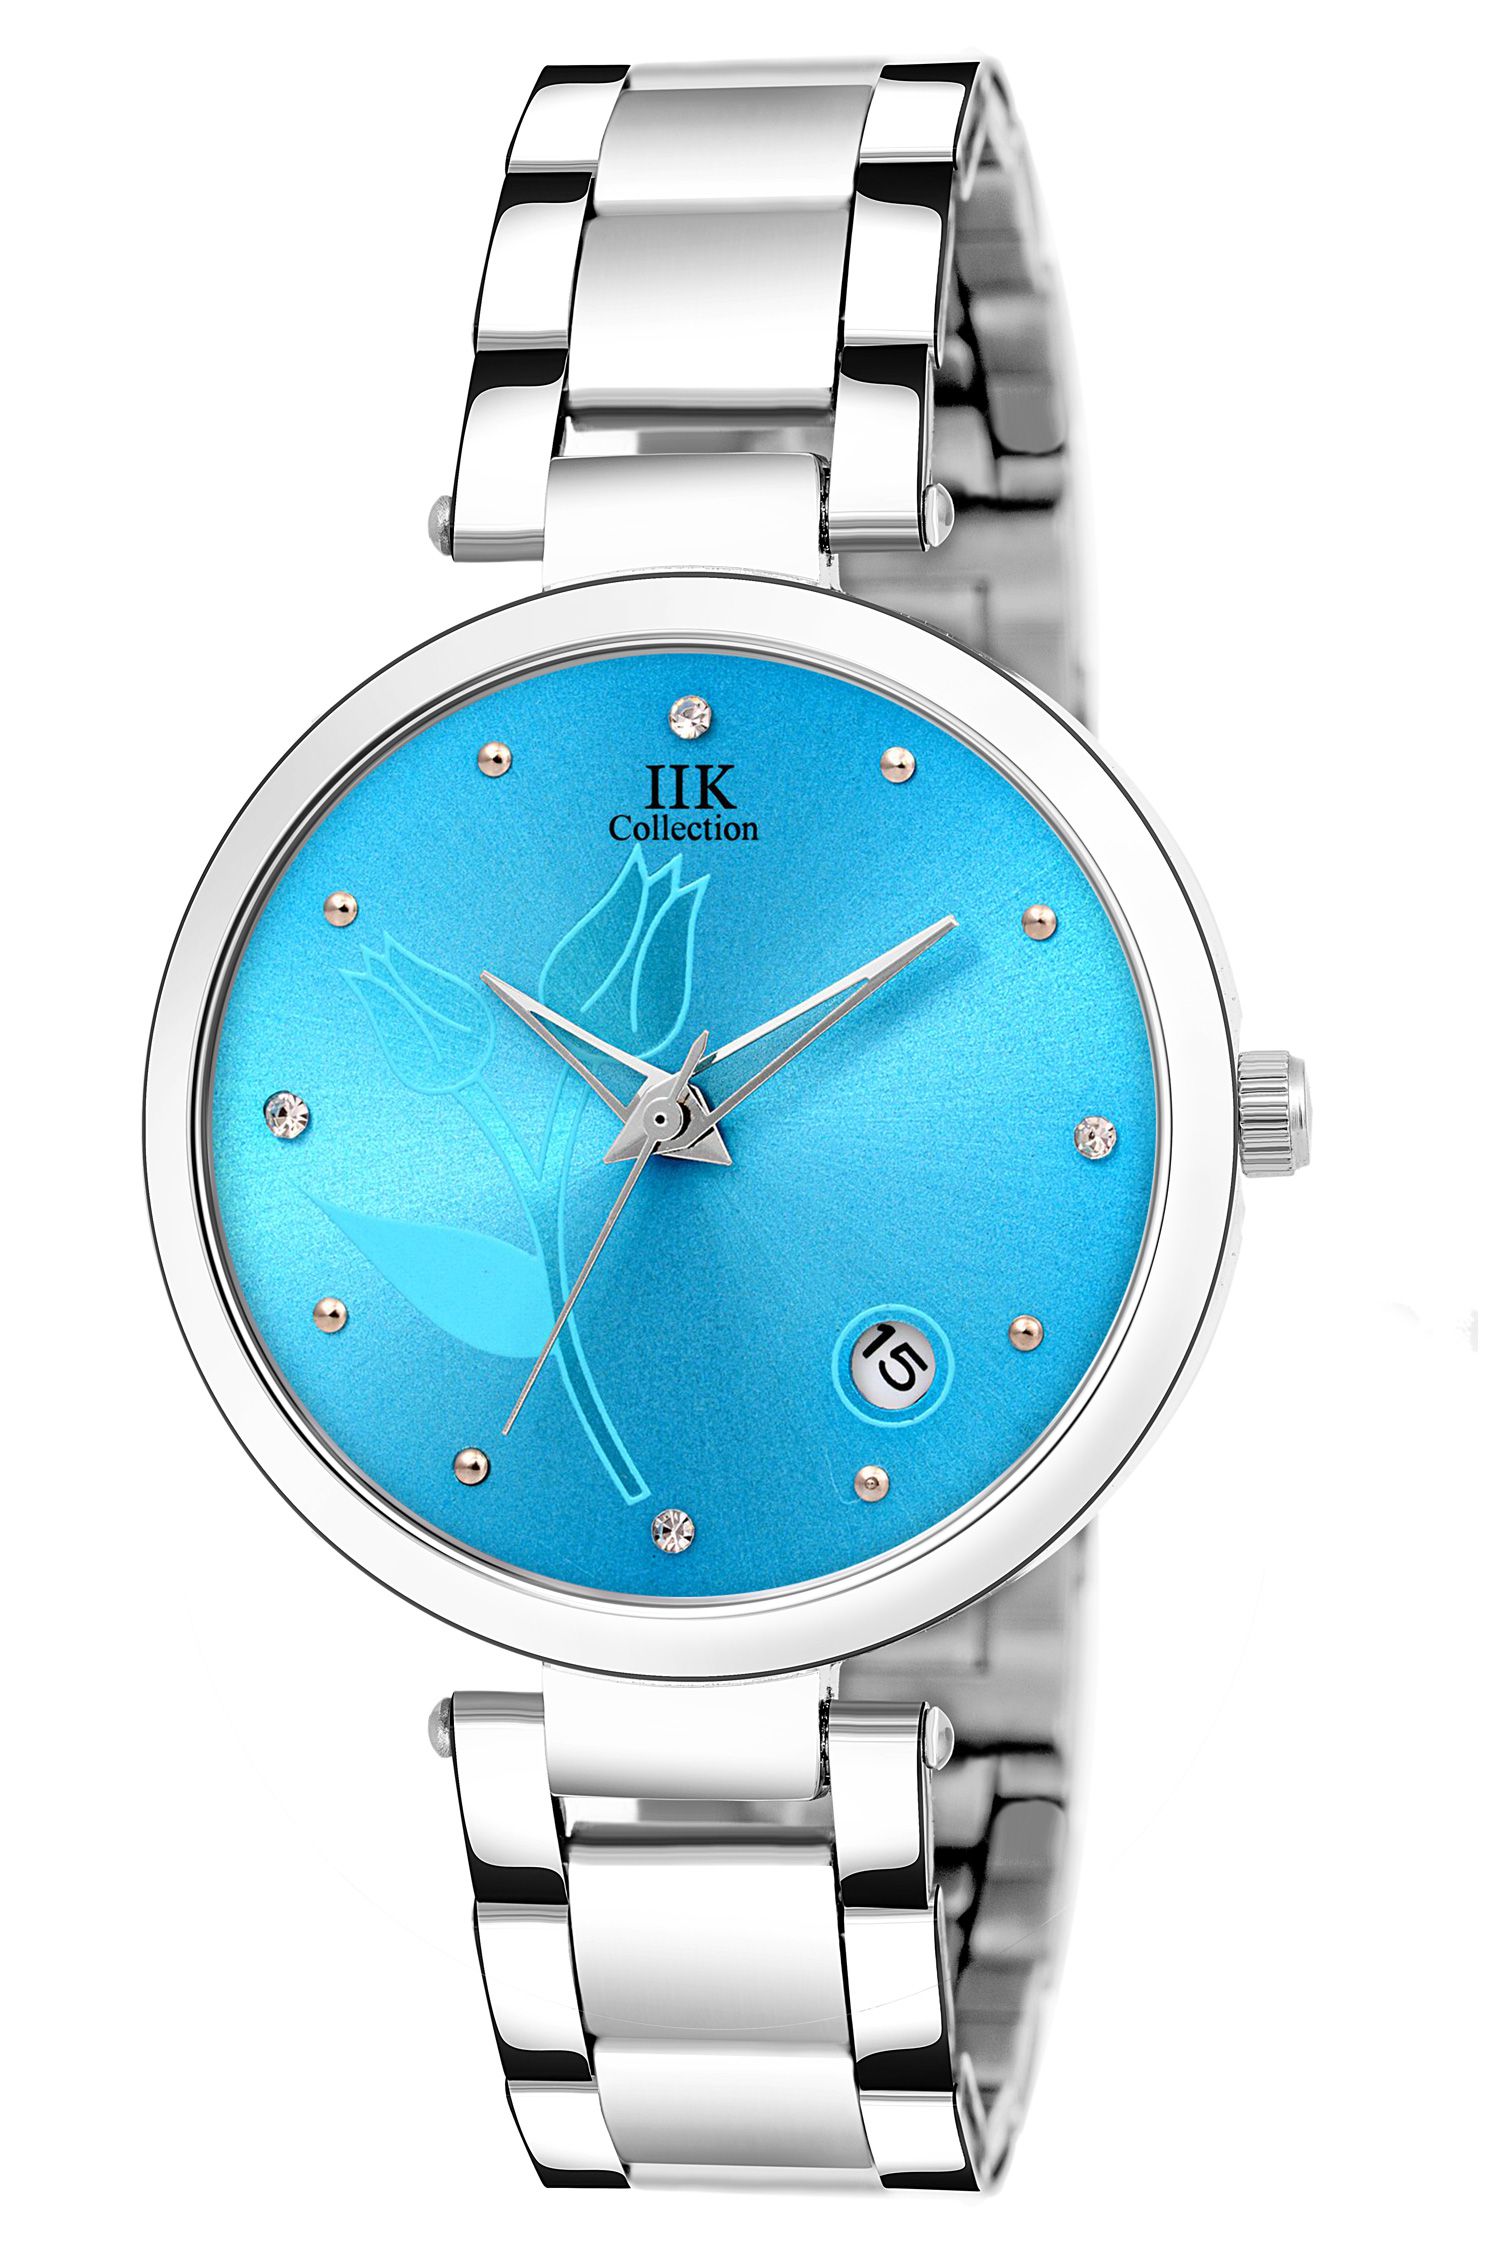 IIK COLLECTION Stainless Steel Round Womens Watch